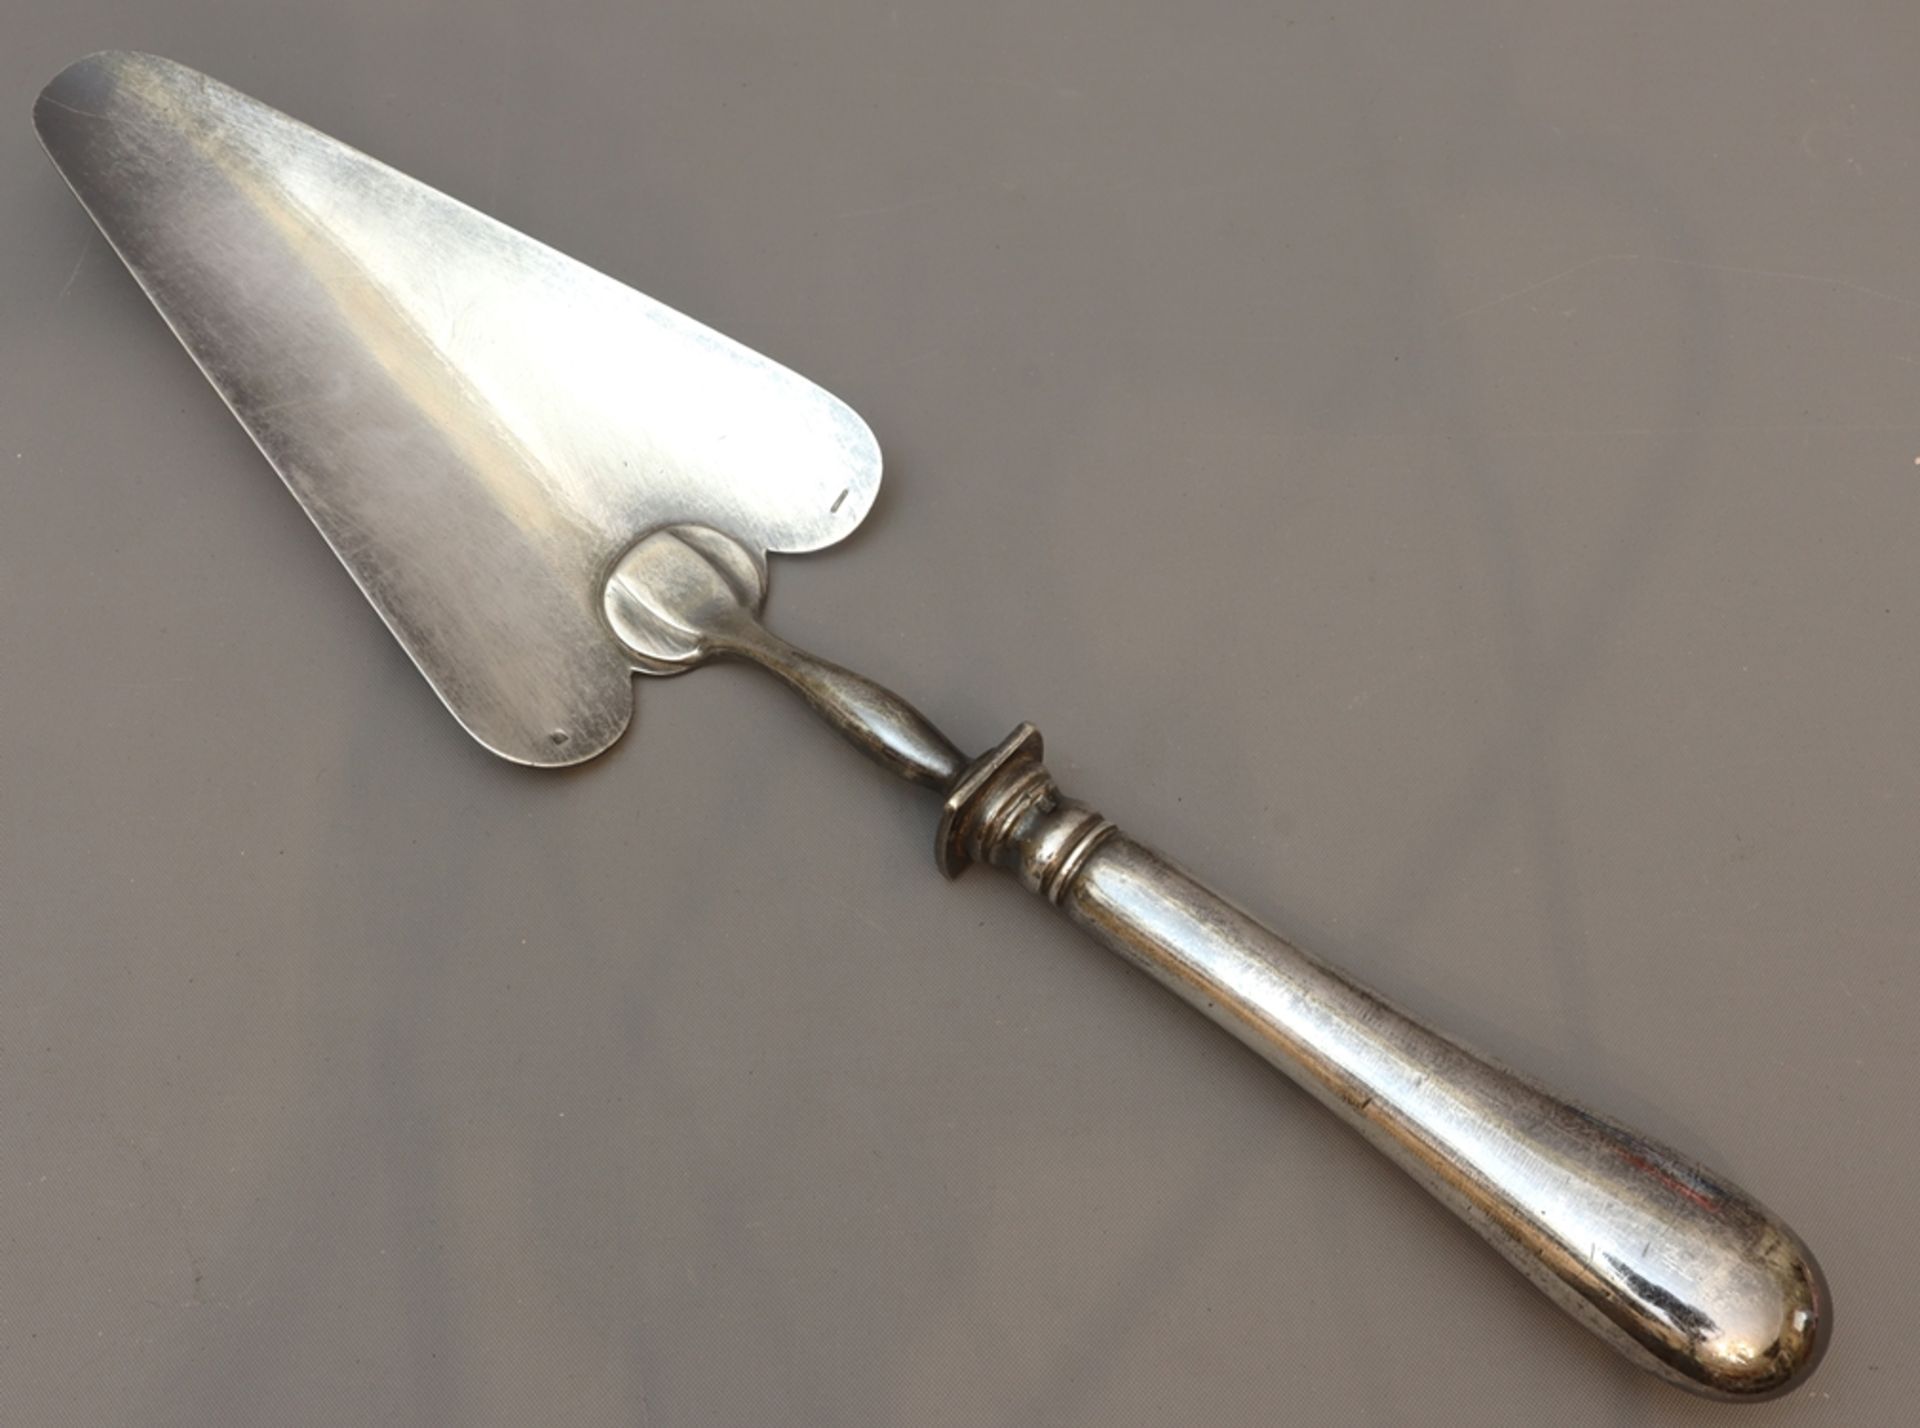 Cake lifter and cake knife, Historicism circa 1900, German - Image 2 of 5